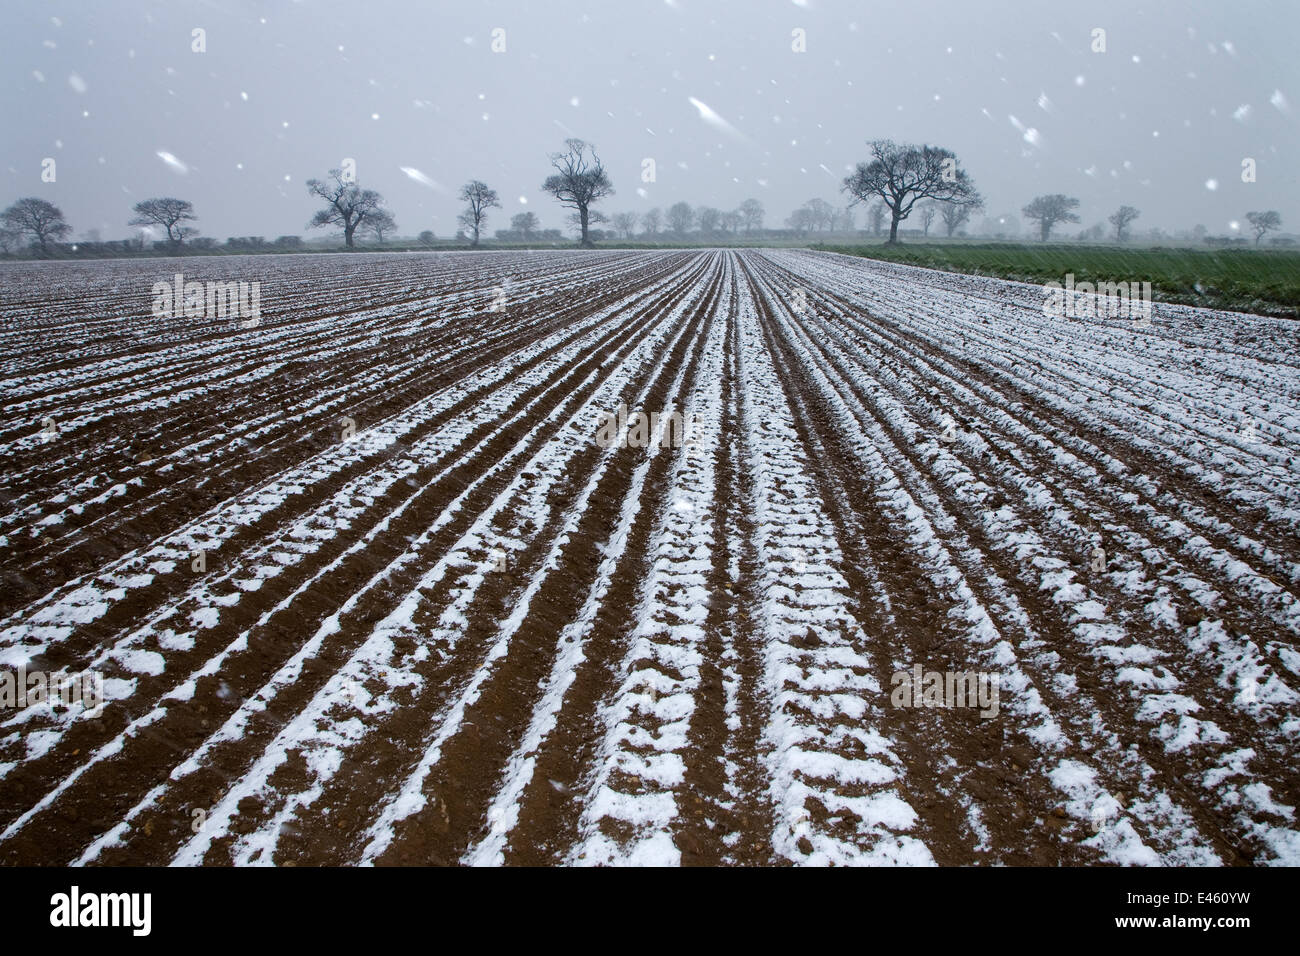 Snow falling on arable land with Oak trees in the background, Southrepps, Norfolk, UK, April Stock Photo